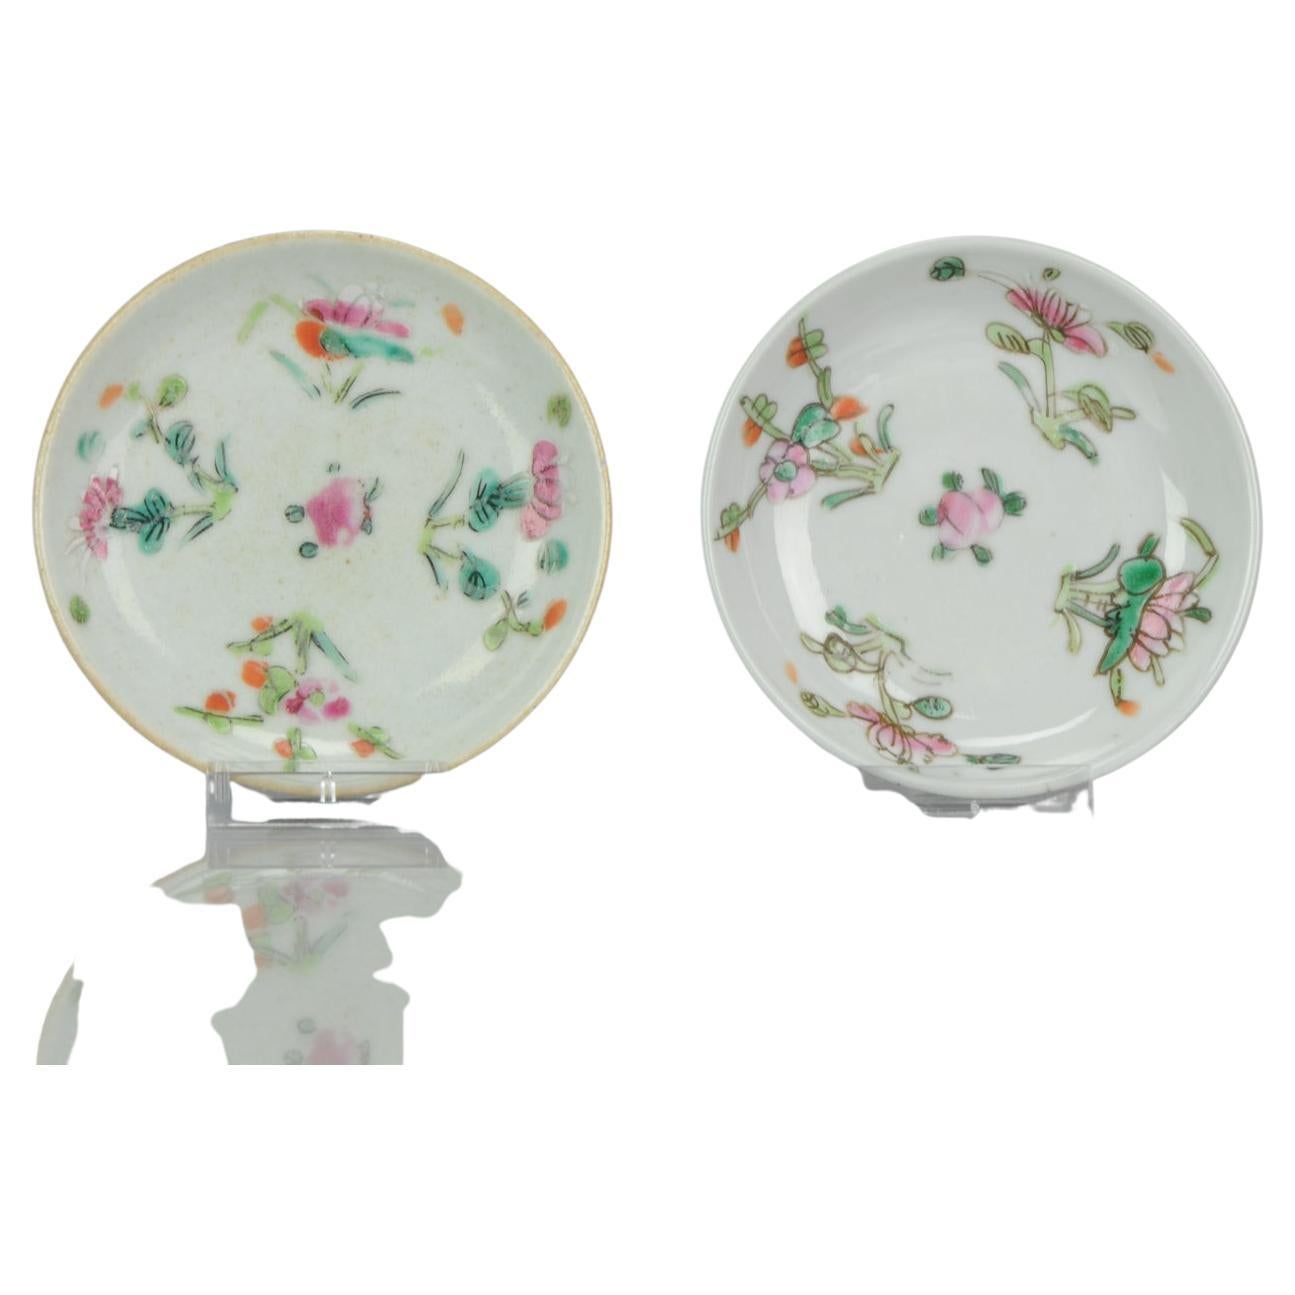 Pair Chinese Porcelain Kitchen Ch'ing Qing Plates South East Asia Market, 19th C